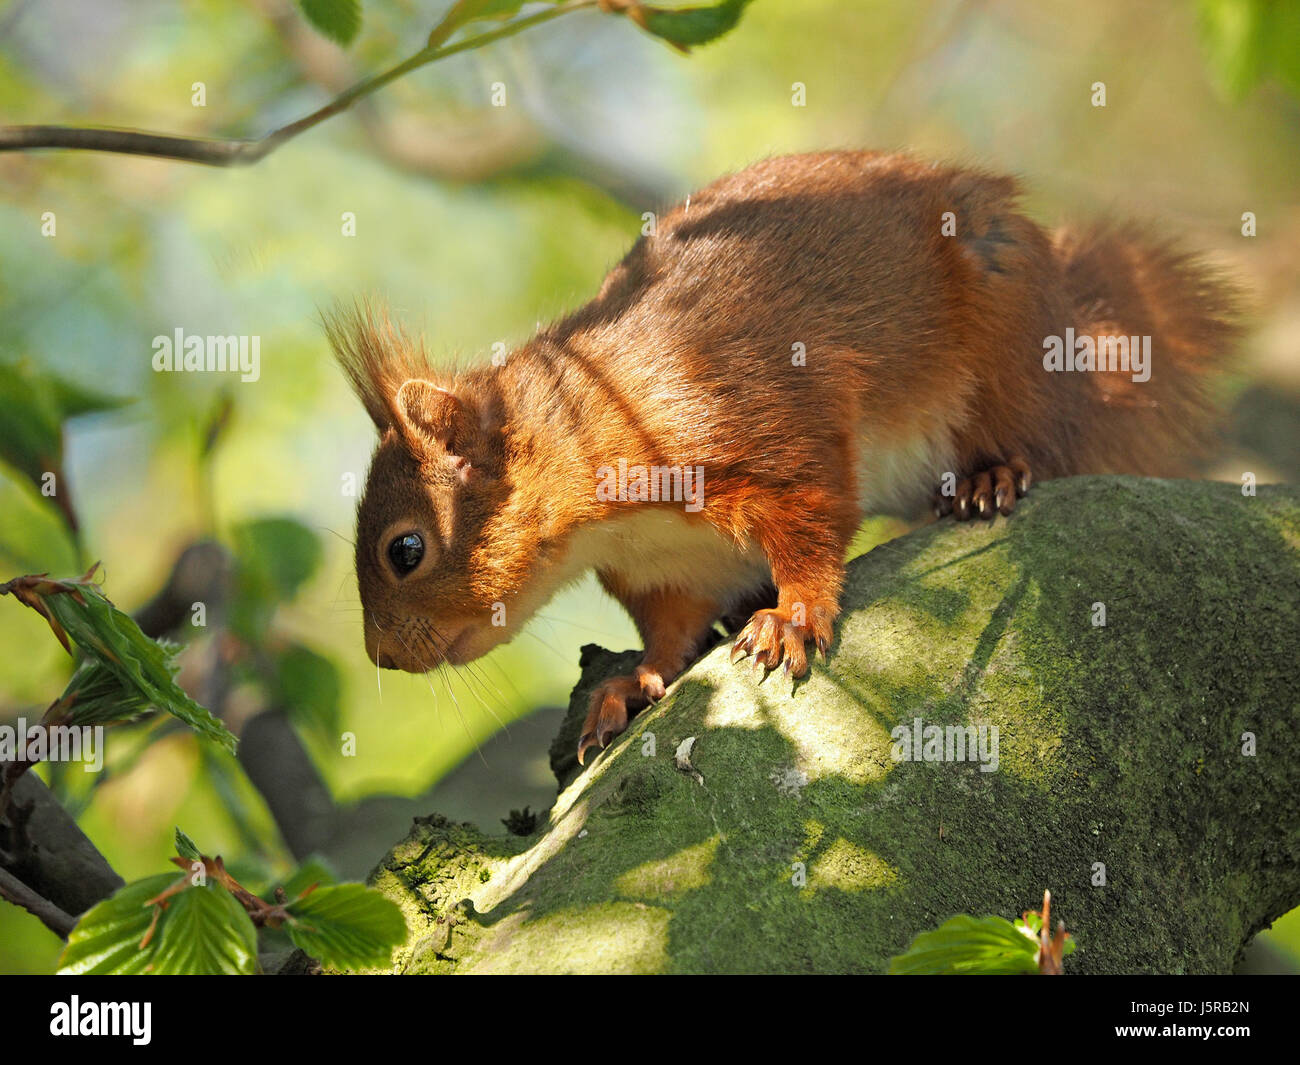 cute native Eurasian red squirrel (Sciurus vulgaris) in good light playing in beech tree in one of the UK's remaining strongholds, Cumbria, England UK Stock Photo